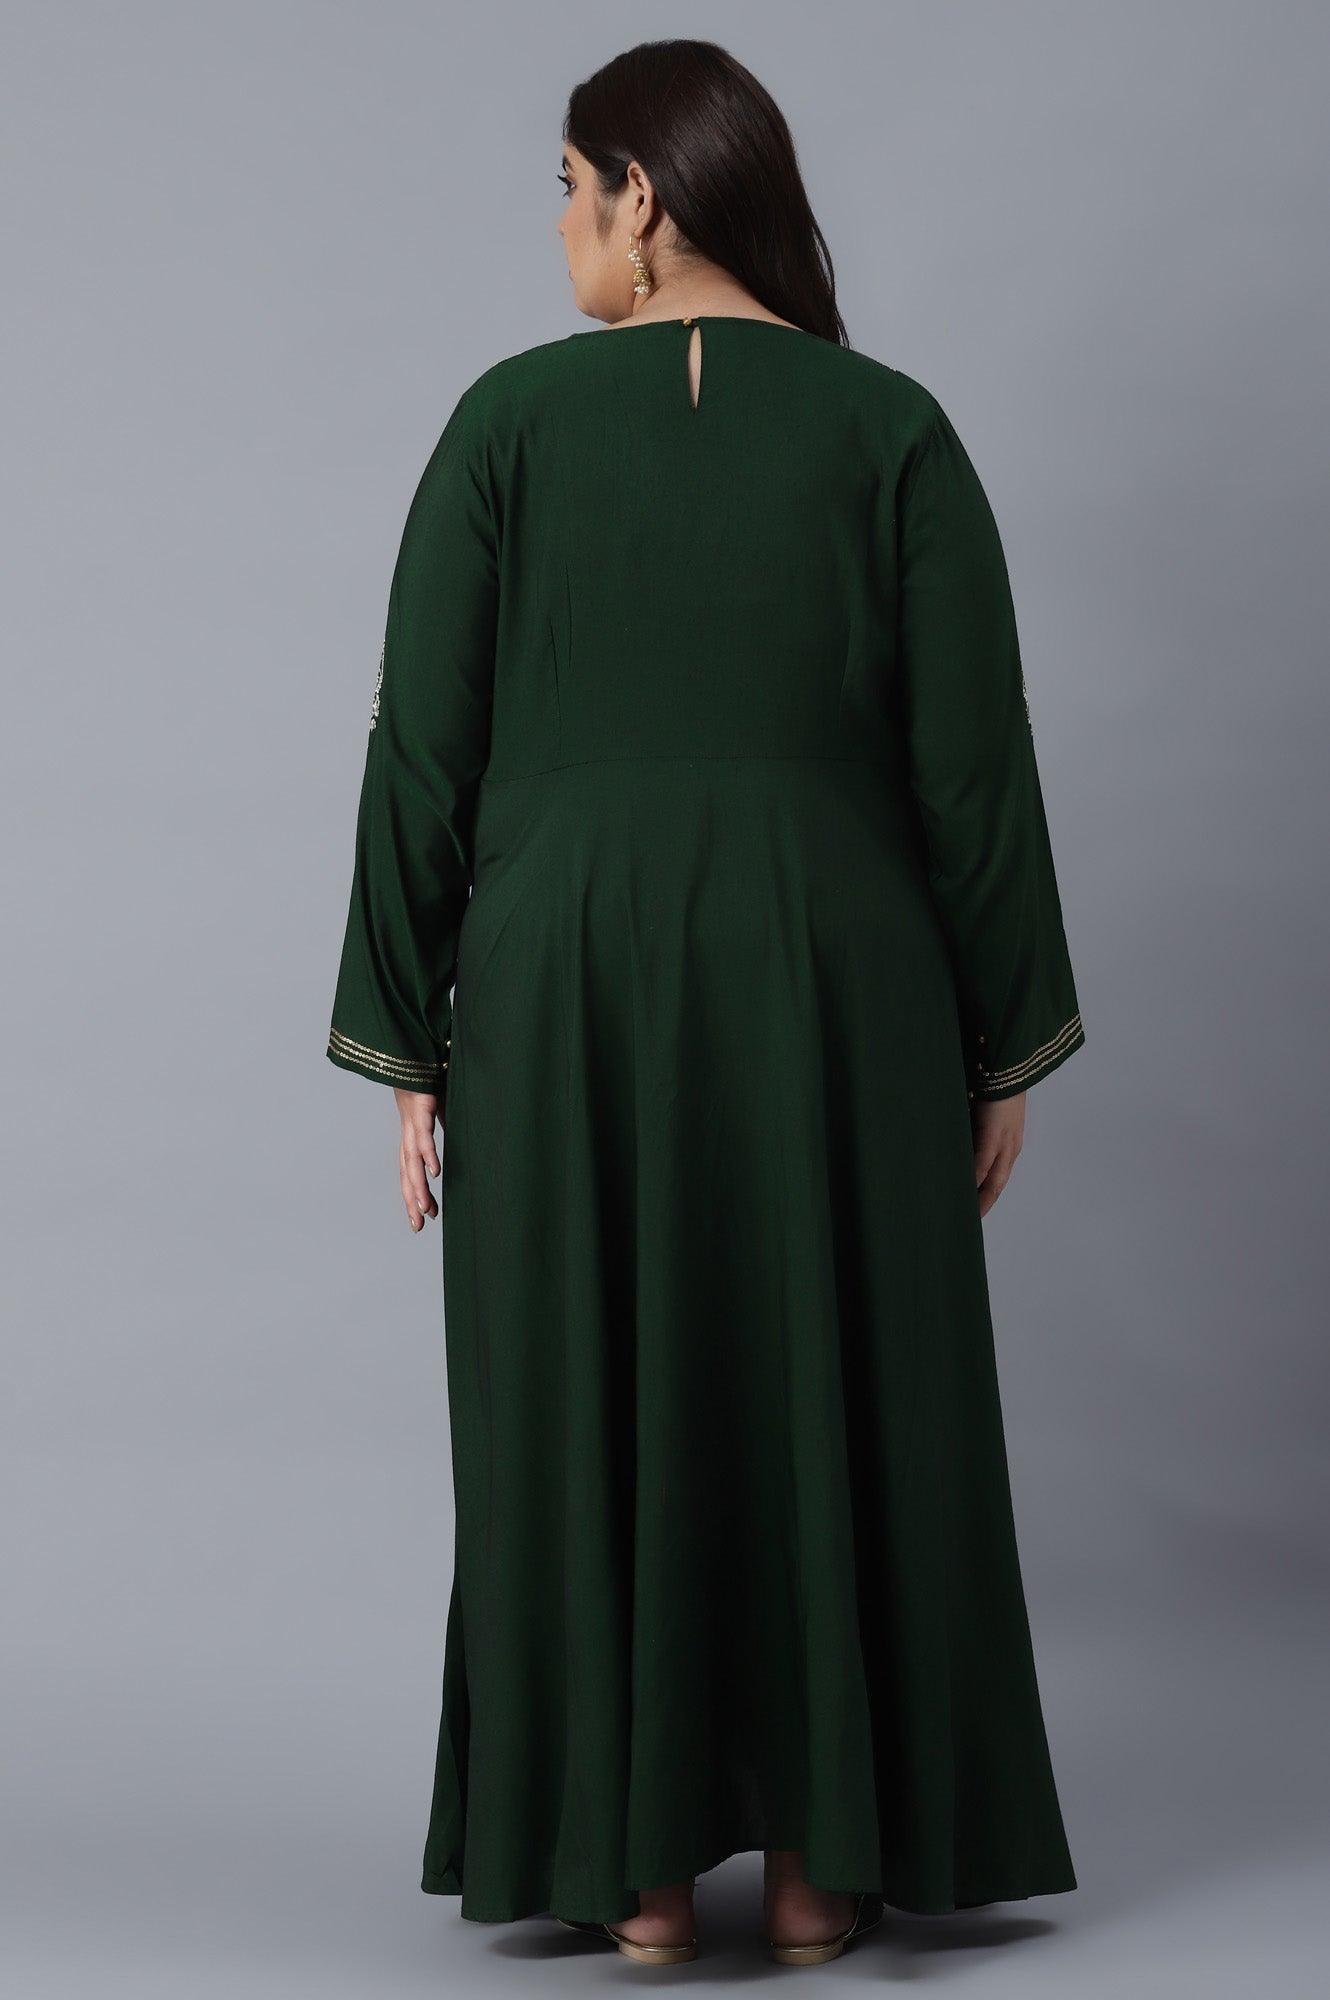 Bottle Green Dress with Embroidery - wforwoman